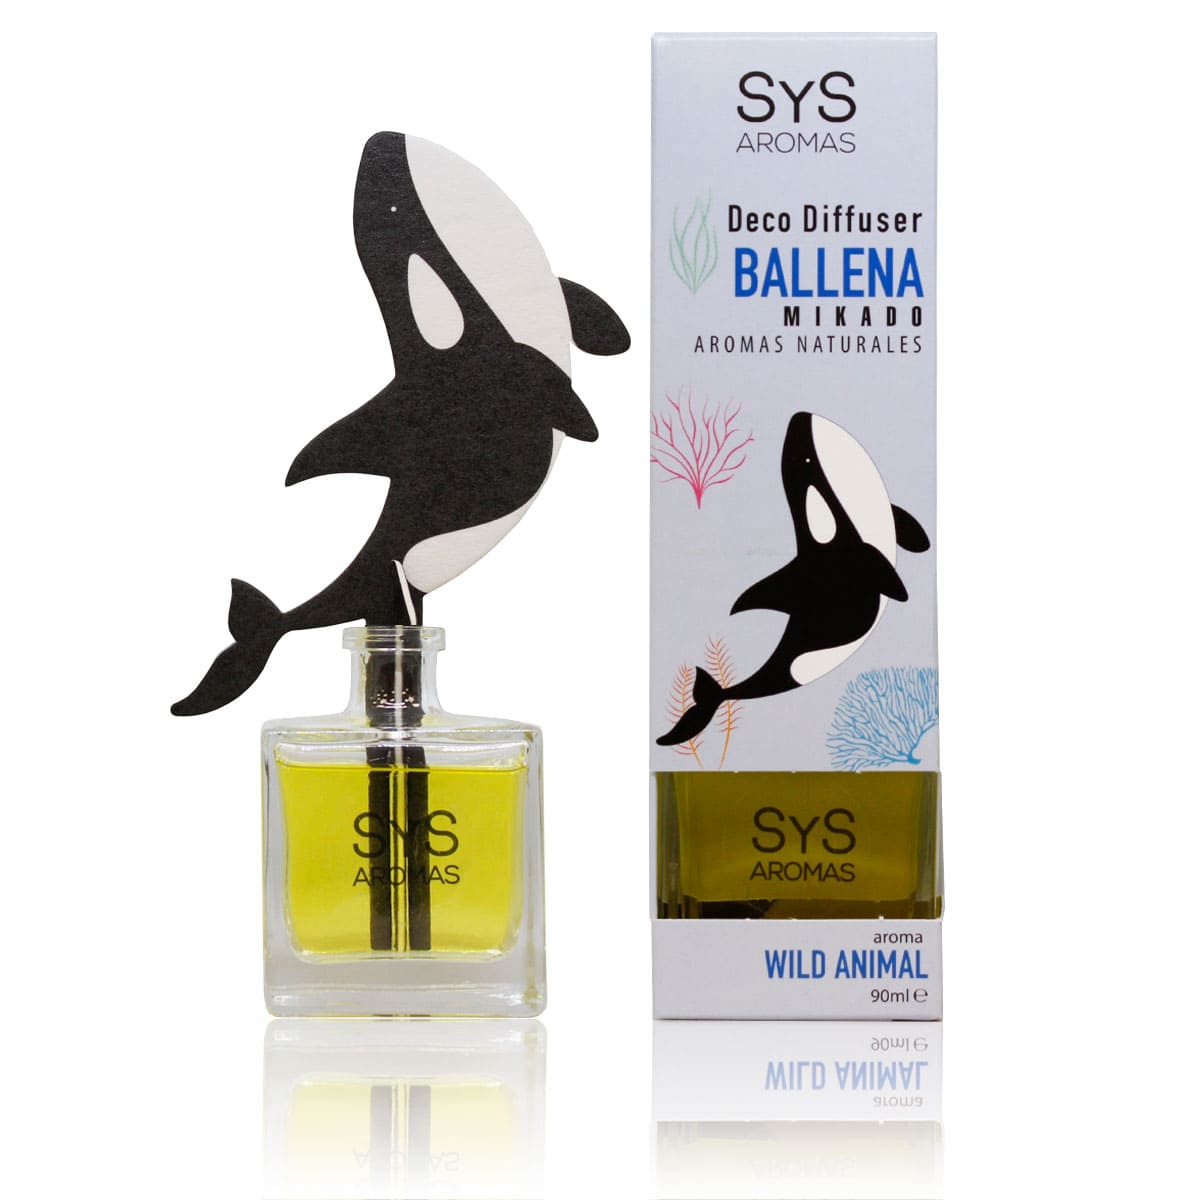 Buy Whale Diffuser Air Freshener 90ml SYS Aromas